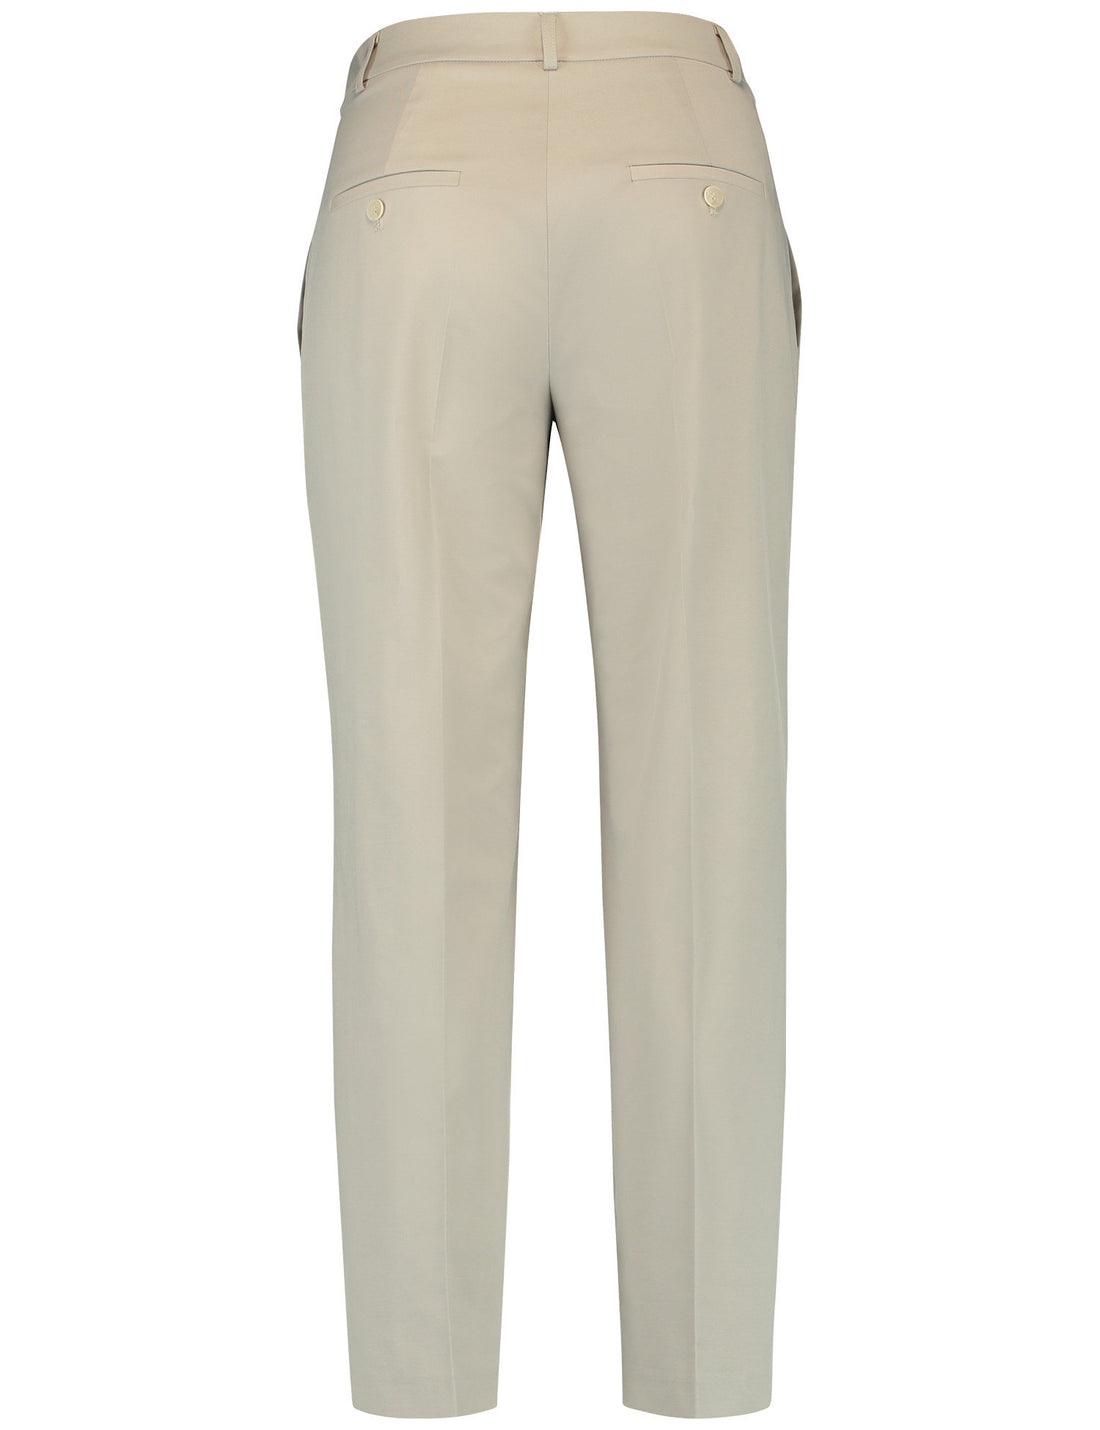 Straight Elegant Trousers With Pressed Pleats_320003-31332_90031_02